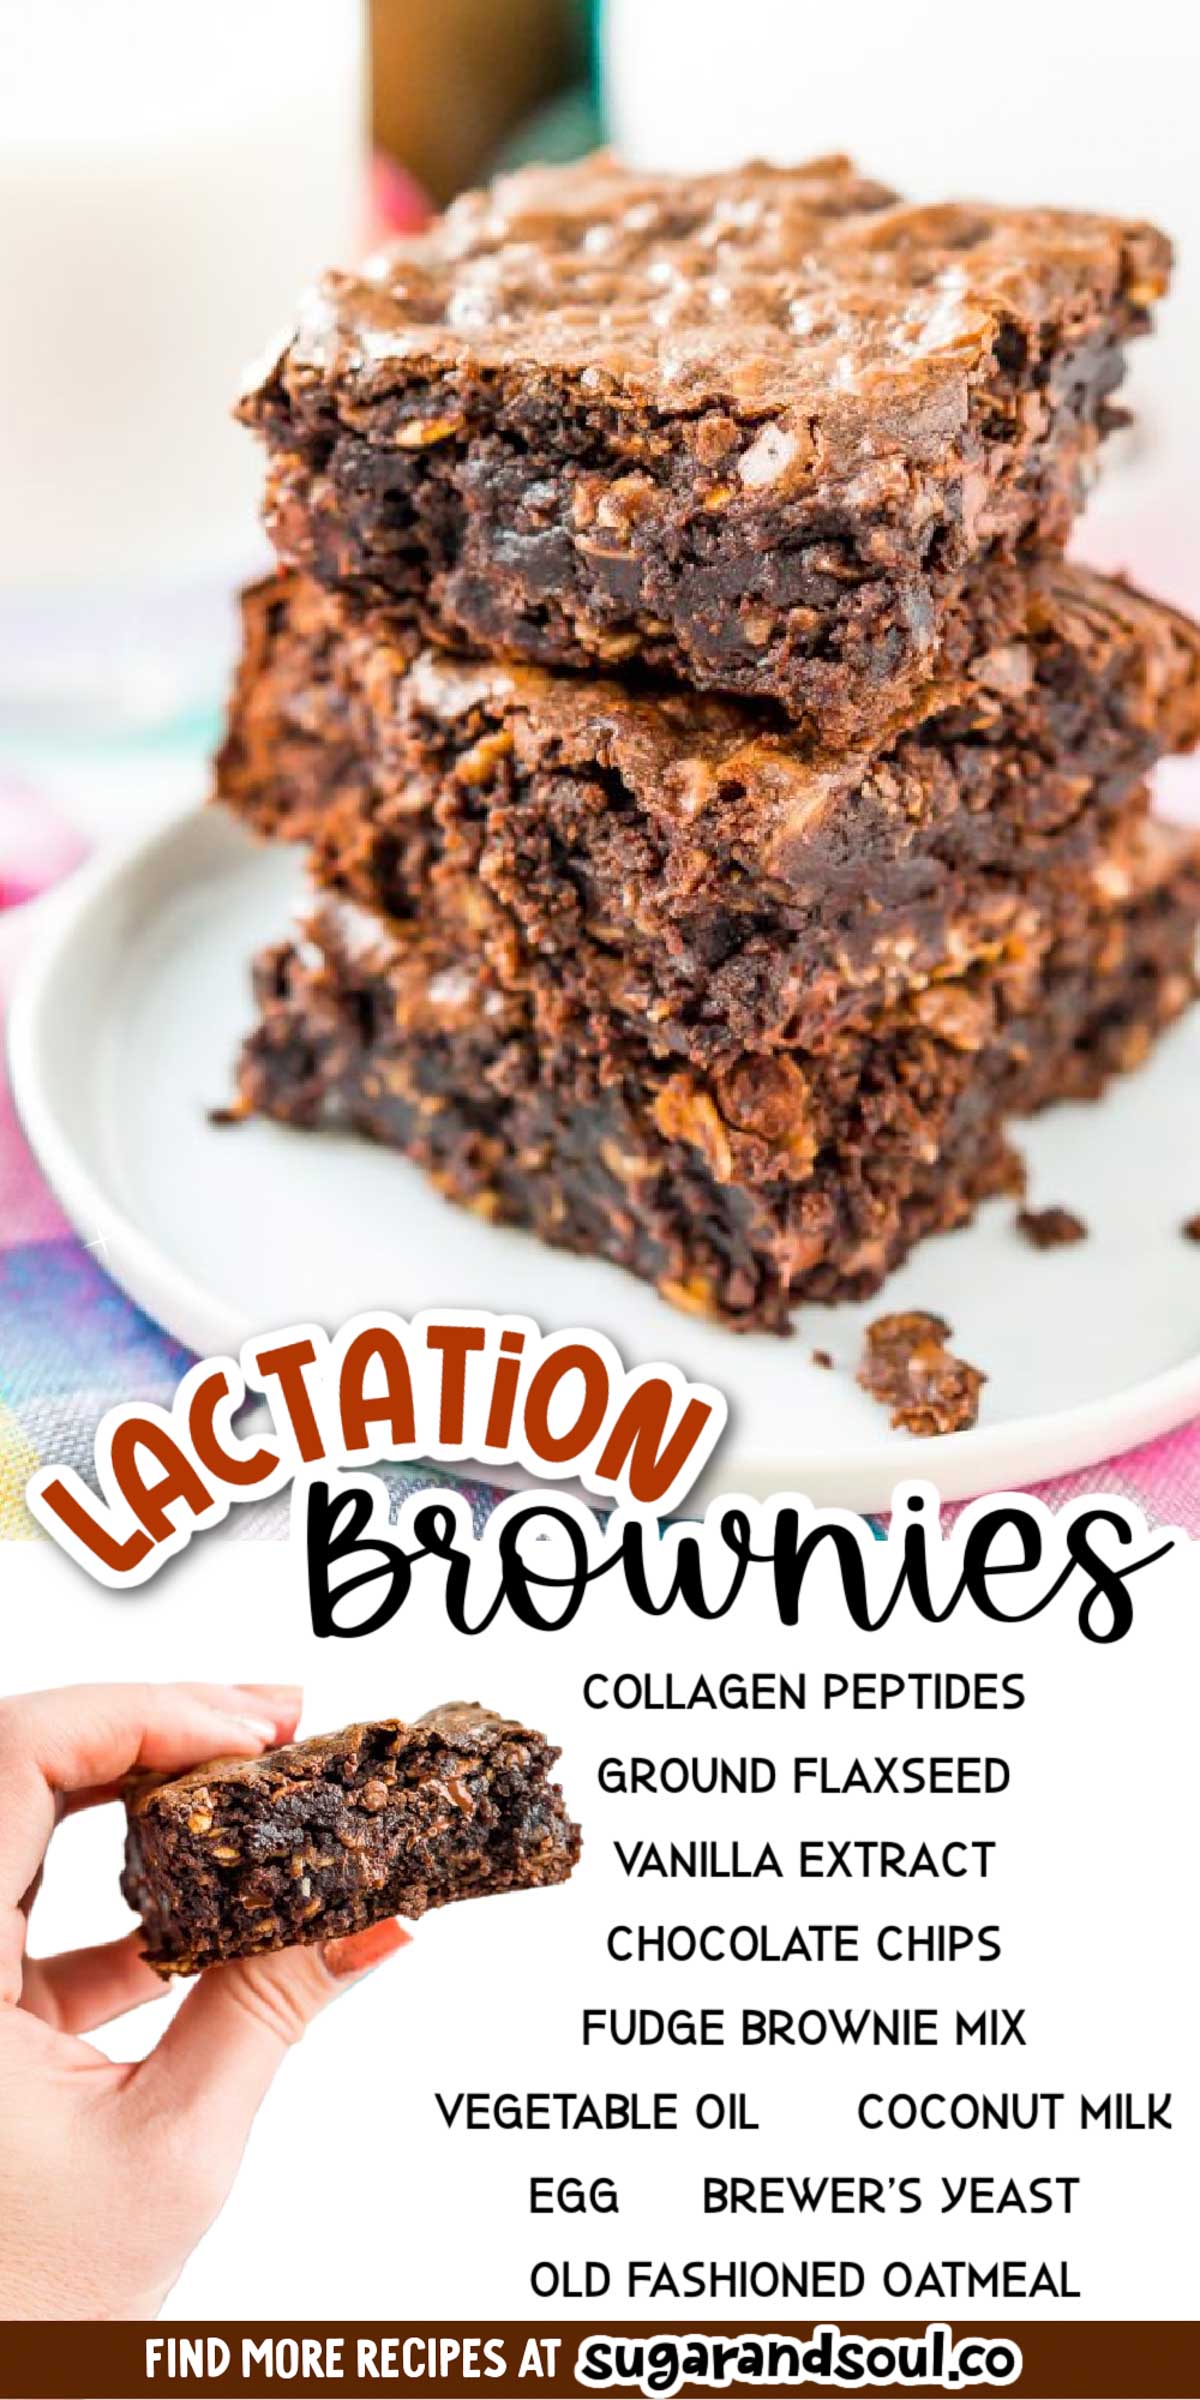 Need to boost your breast milk production fast? Try these Lactation Brownies, an easy dessert that helps increase milk production with added ingredients like coconut milk, Brewer's yeast, and oatmeal! via @sugarandsoulco